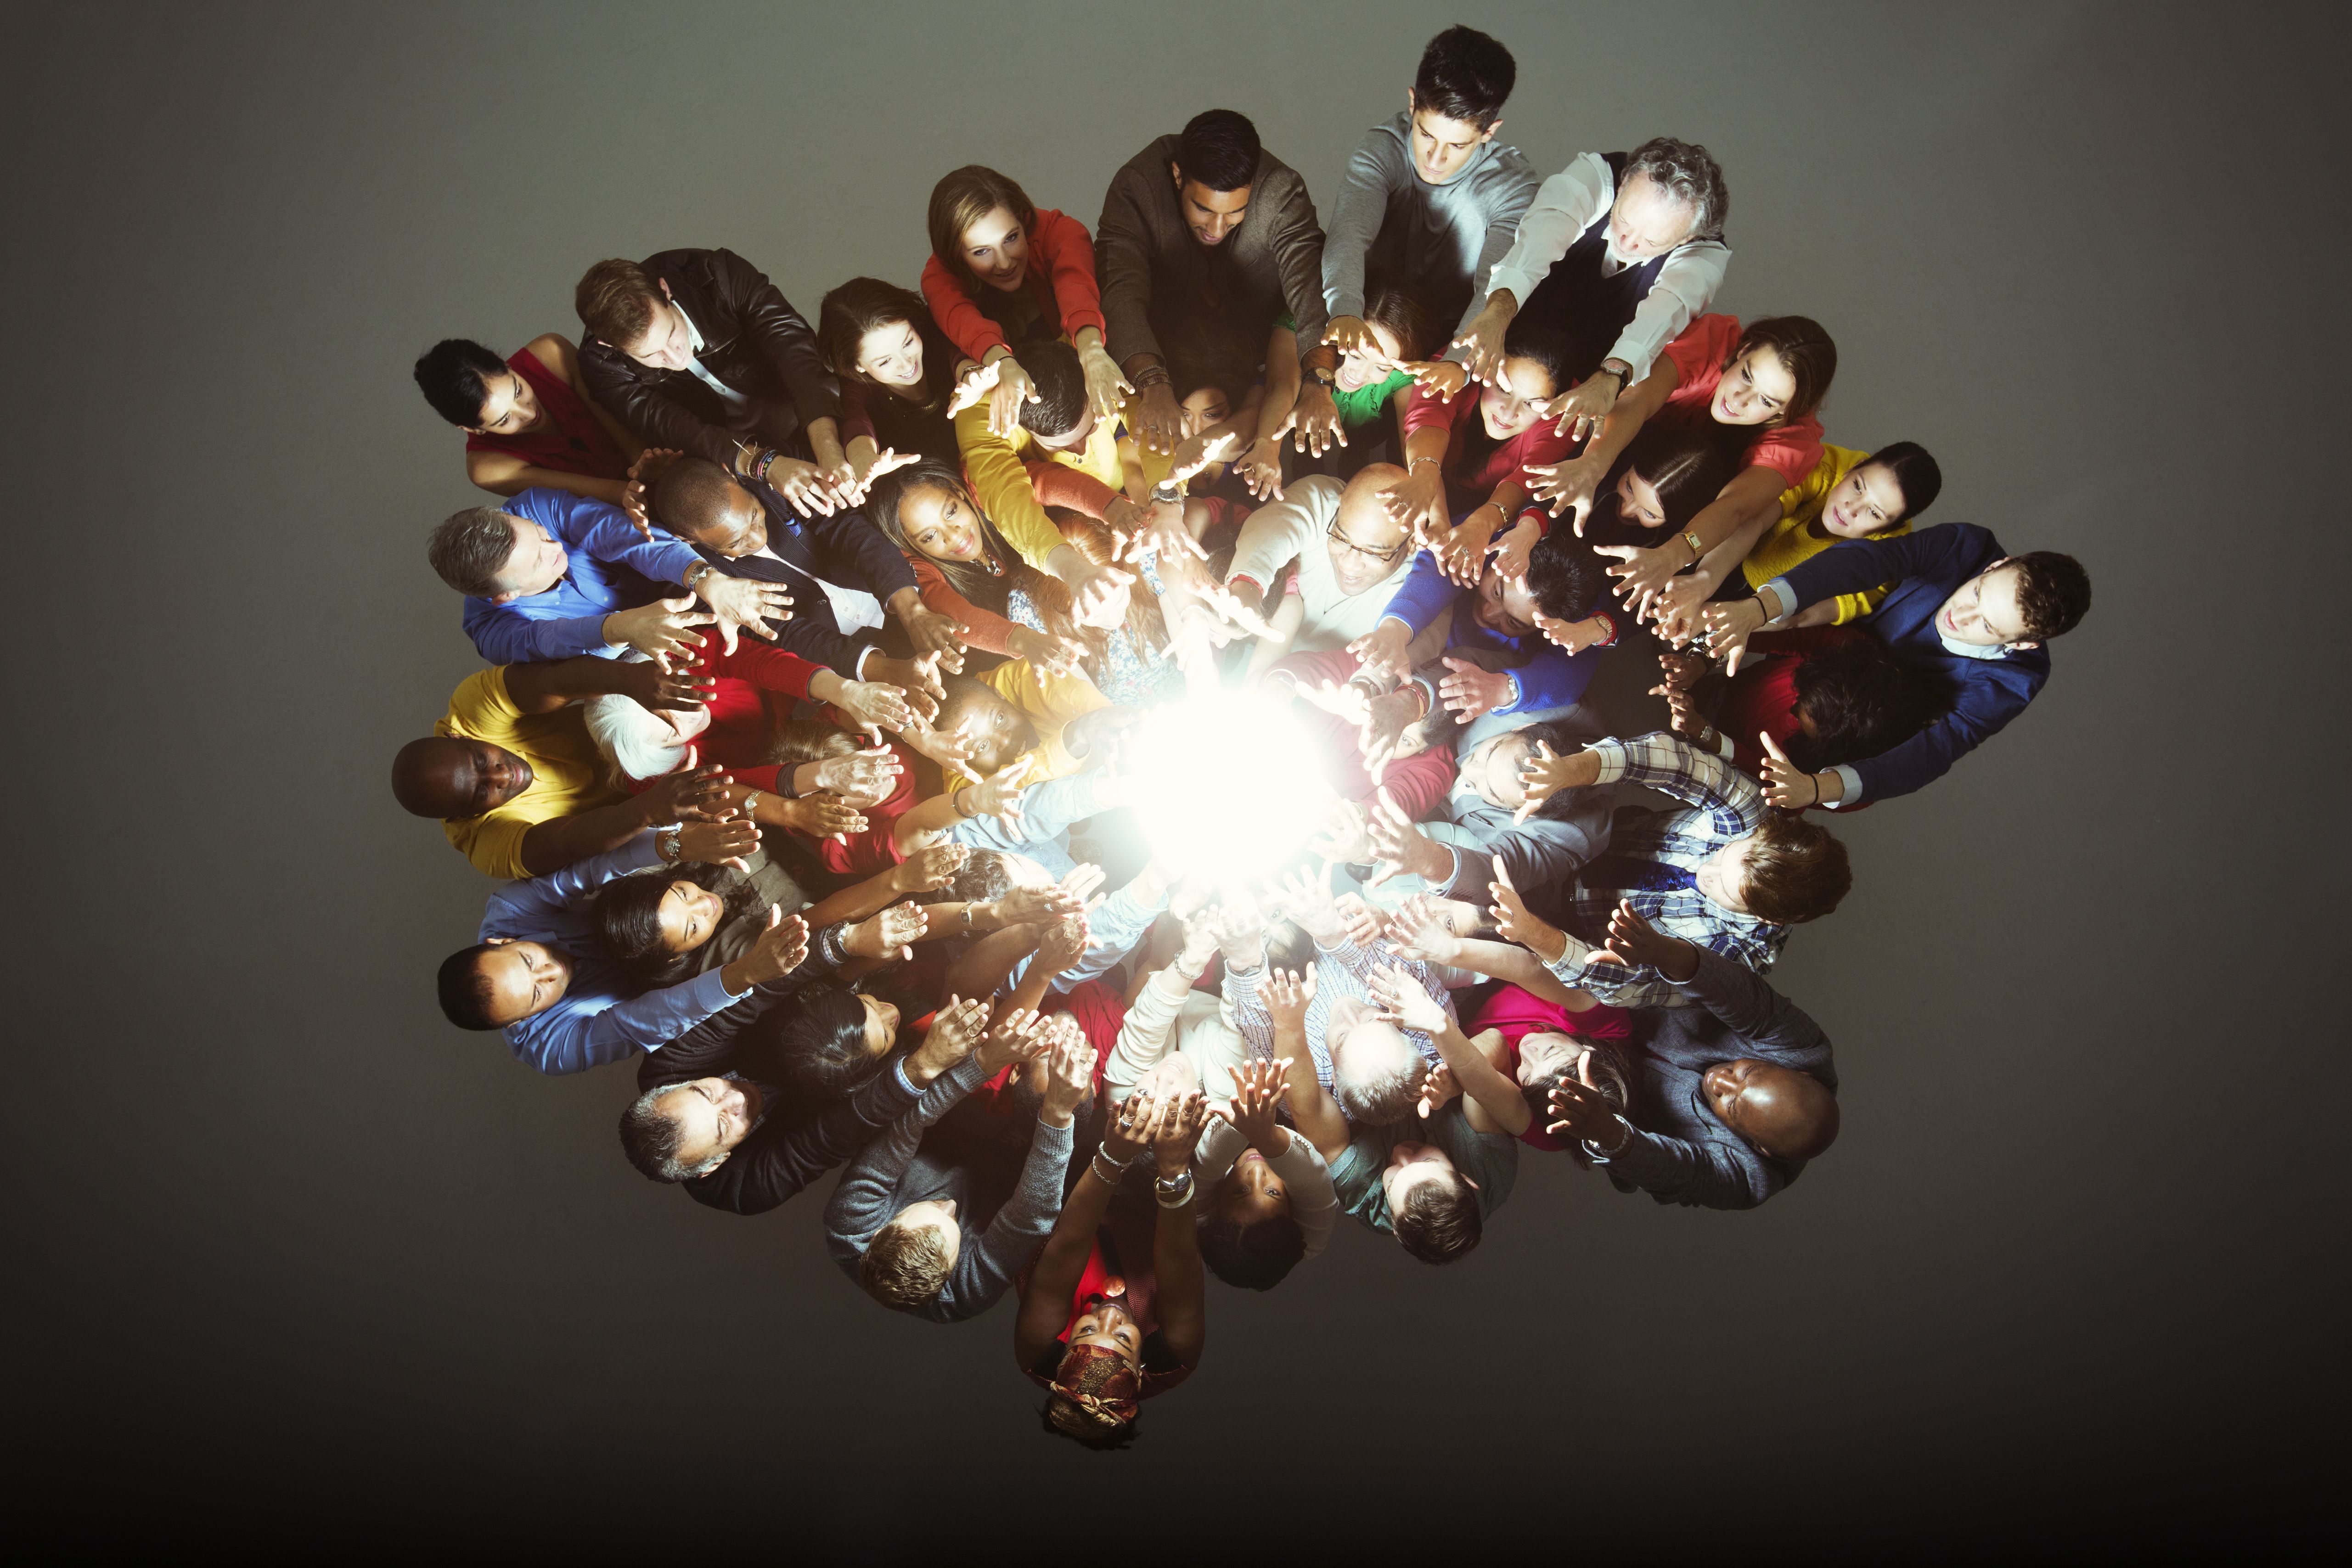 Diverse people gathered a bright light suggestive of the power of collaboration